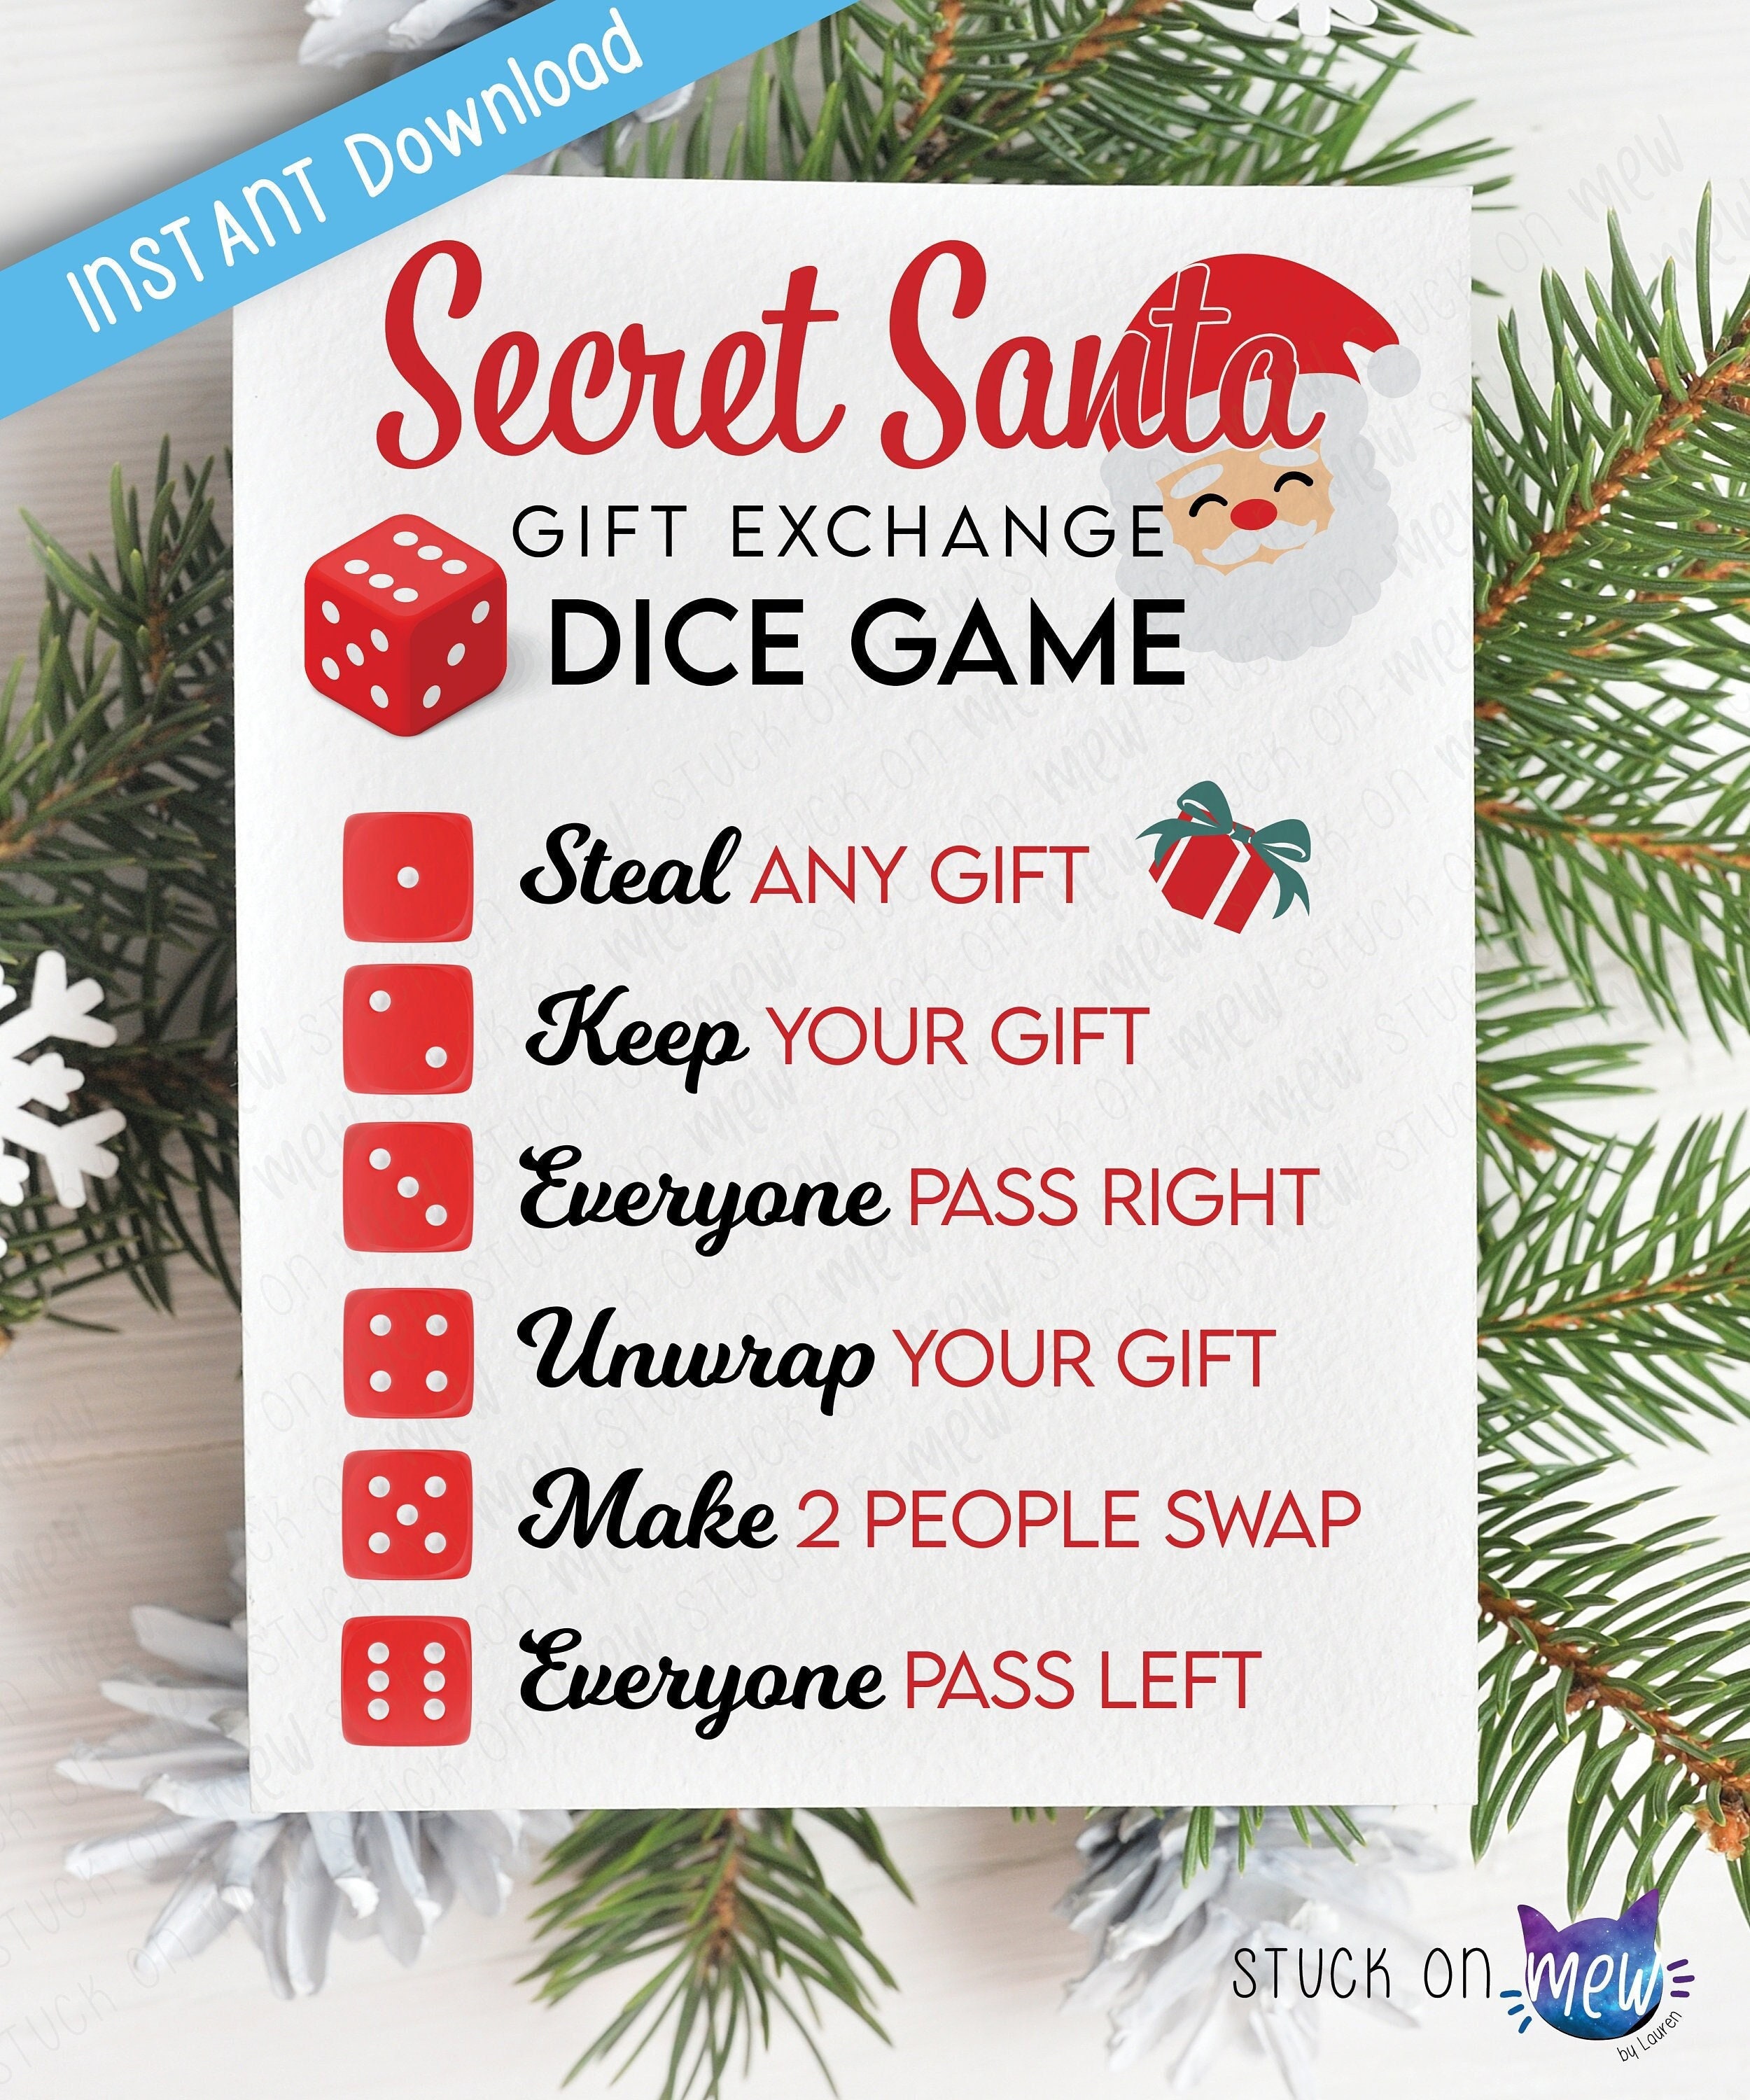 How to play and win the gift-stealing game Bad Santa, according to